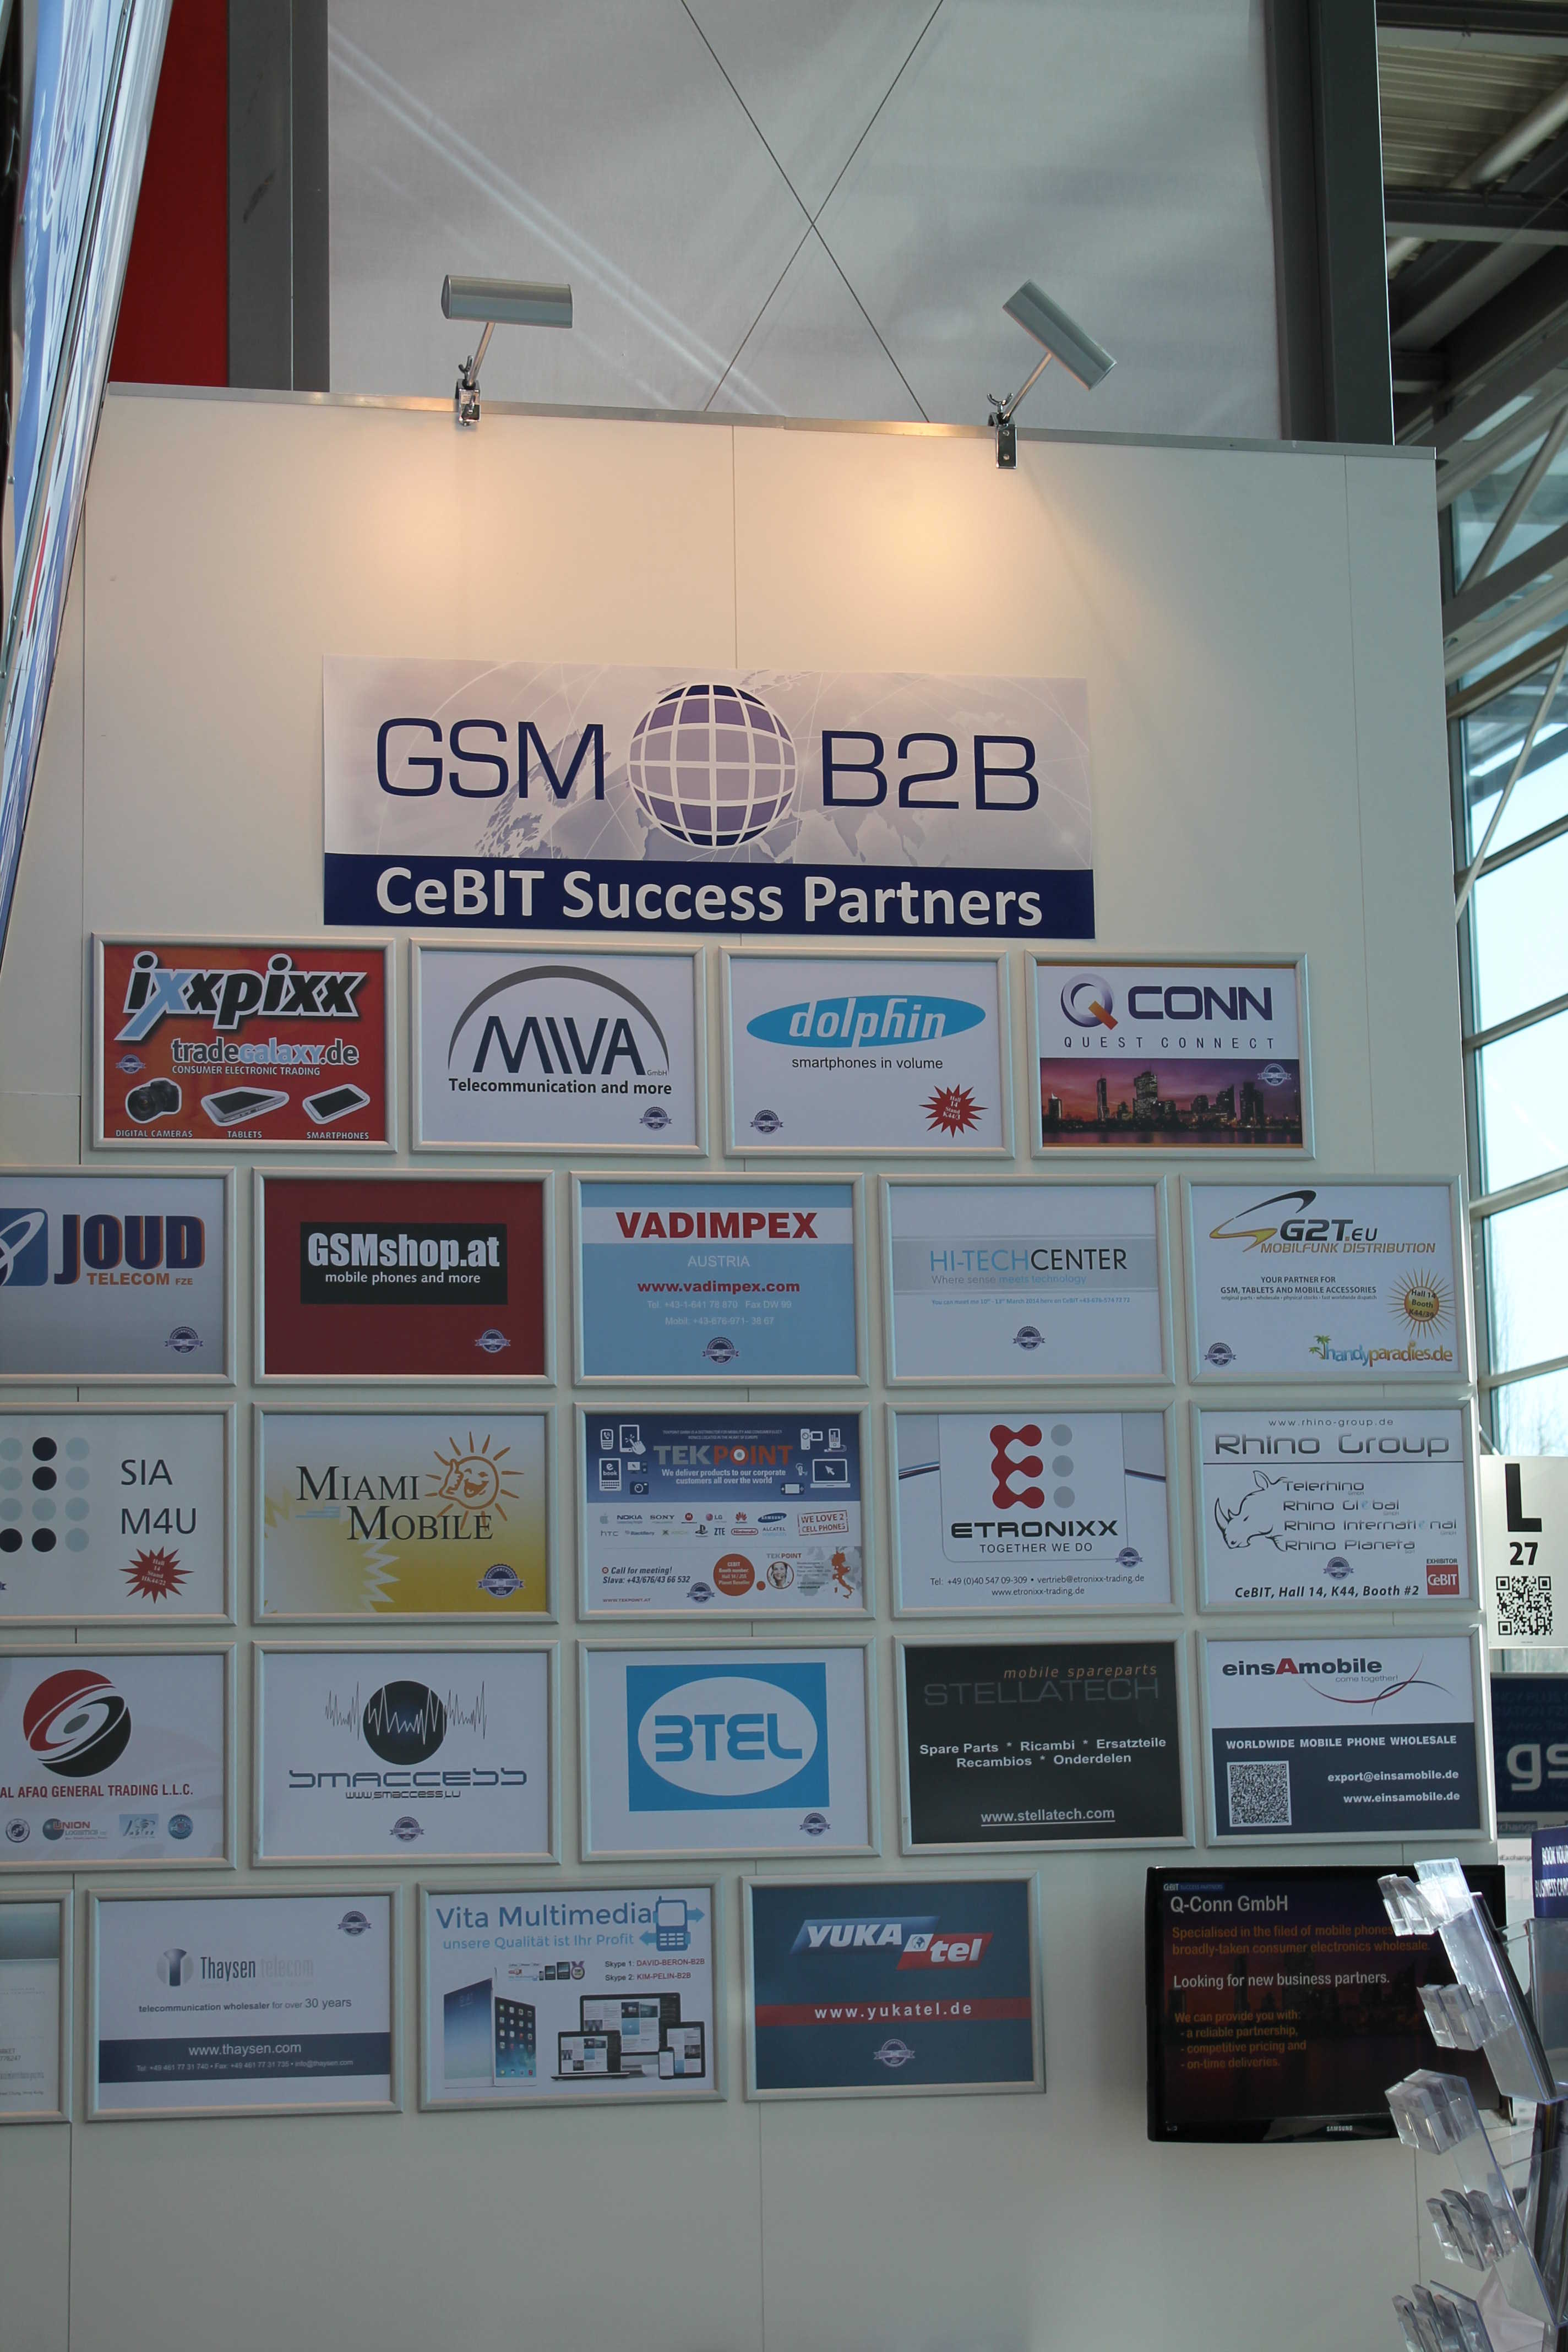 GSMB2B the leading Business Network for professional mobile phones